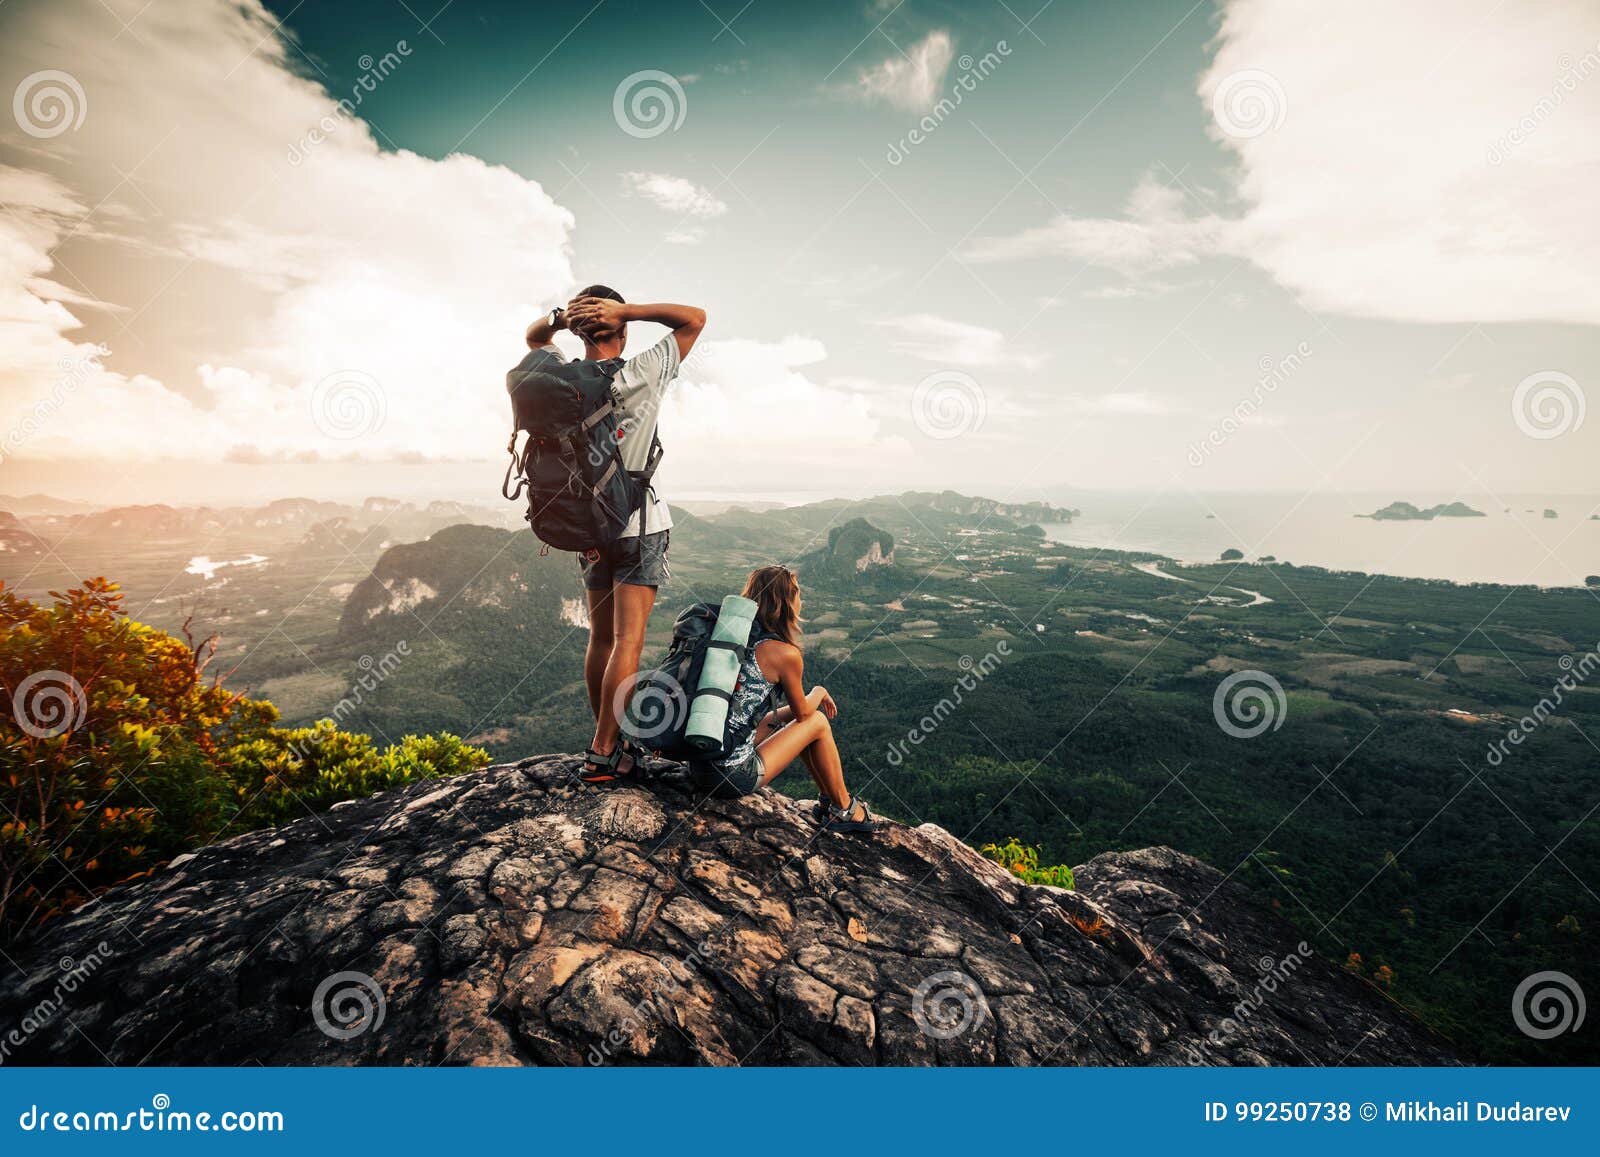 two hikers relax on top of a mountain